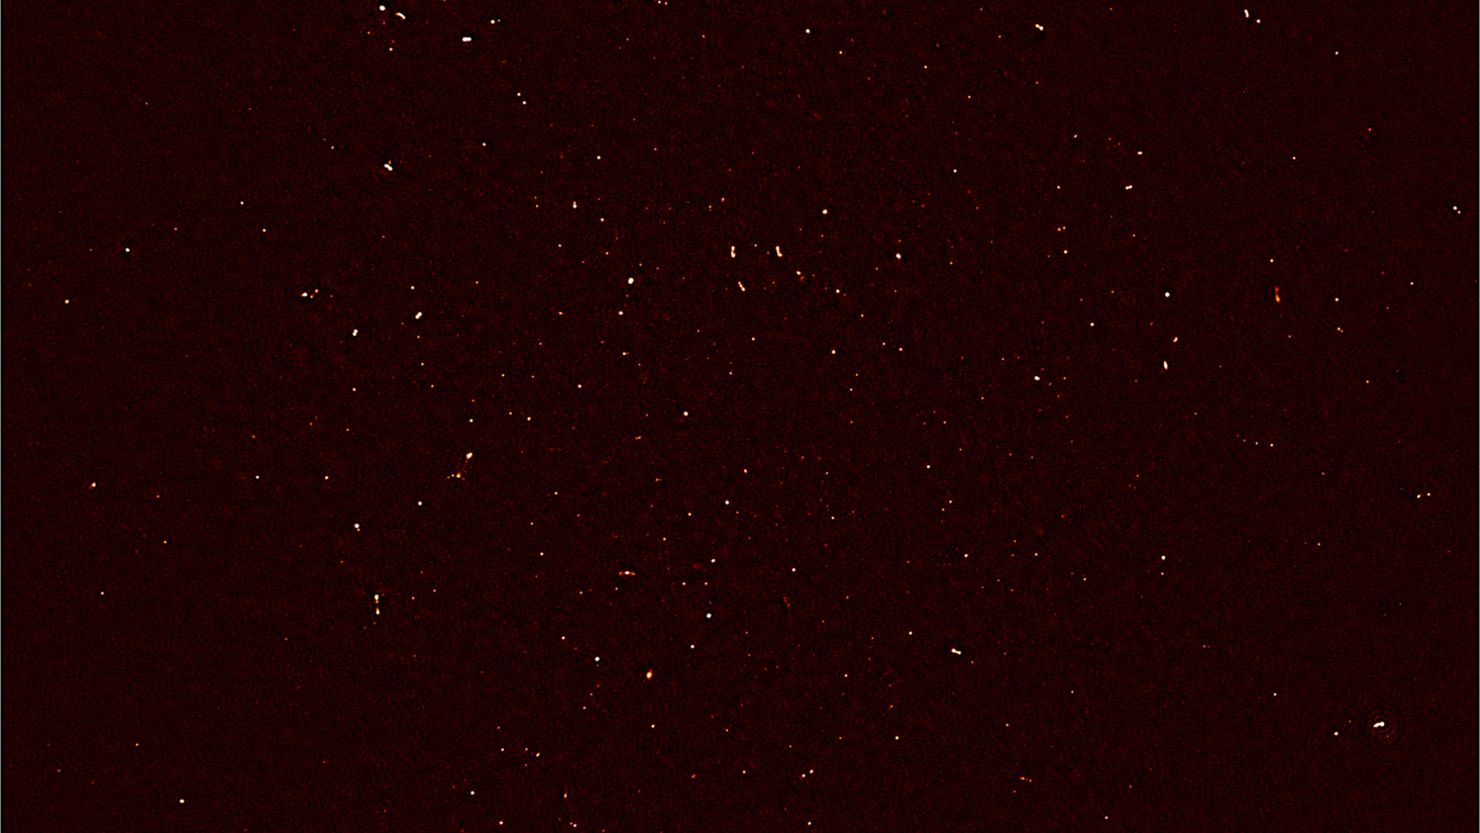 First image released by the MeerKAT radio telescope showing hundreds of previously undetected galaxies.